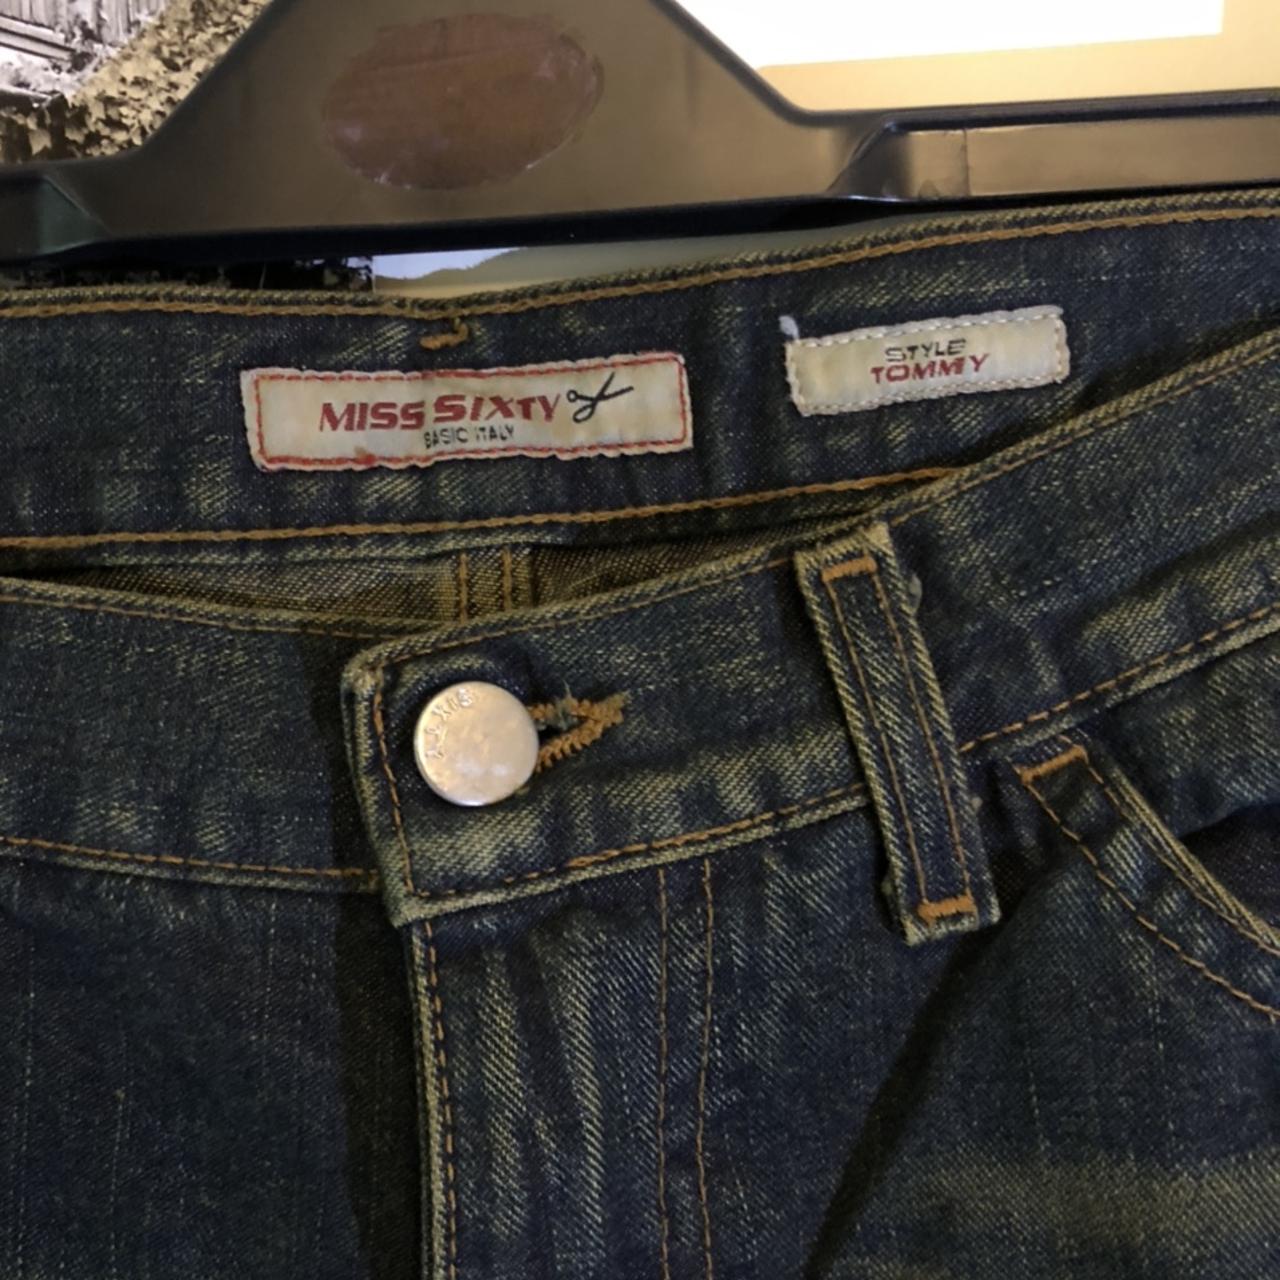 Product Image 3 - Miss sixty jeans, never worn